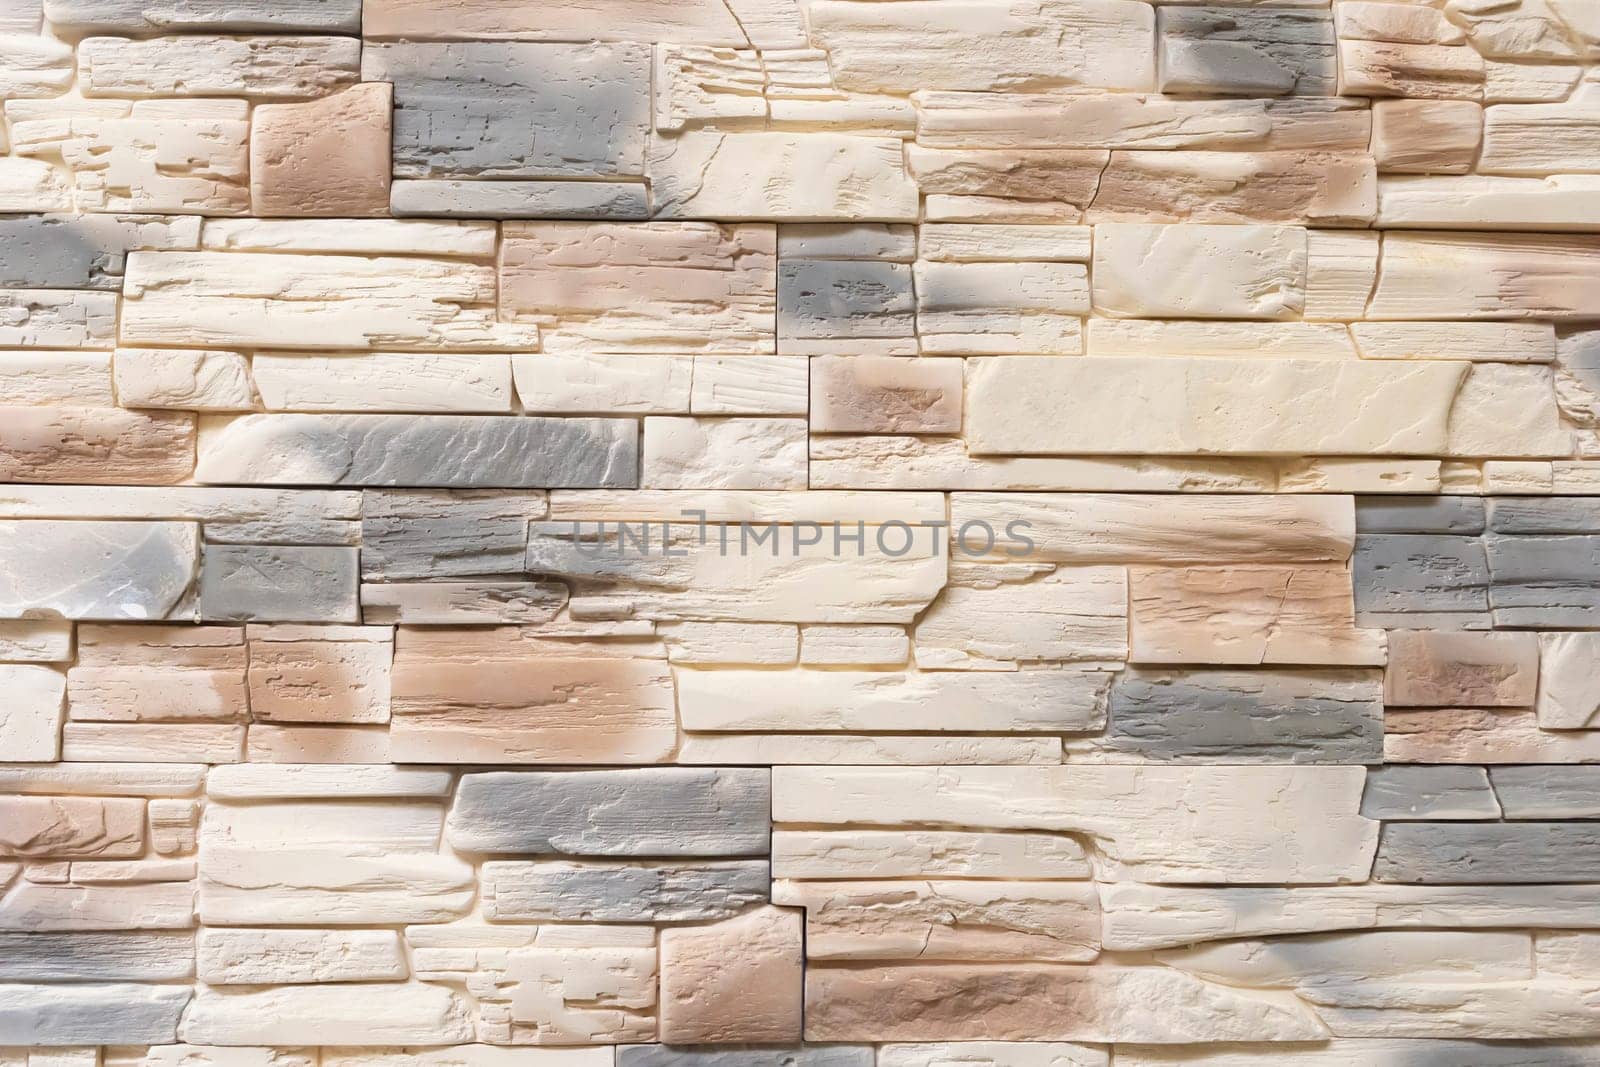 ingots, bars, blocks, brick of white beige grey brown decorative stones, tiles lay one on another, in appropriate manner, modern interior, facade. Pattern, background, original look. Horizontal.